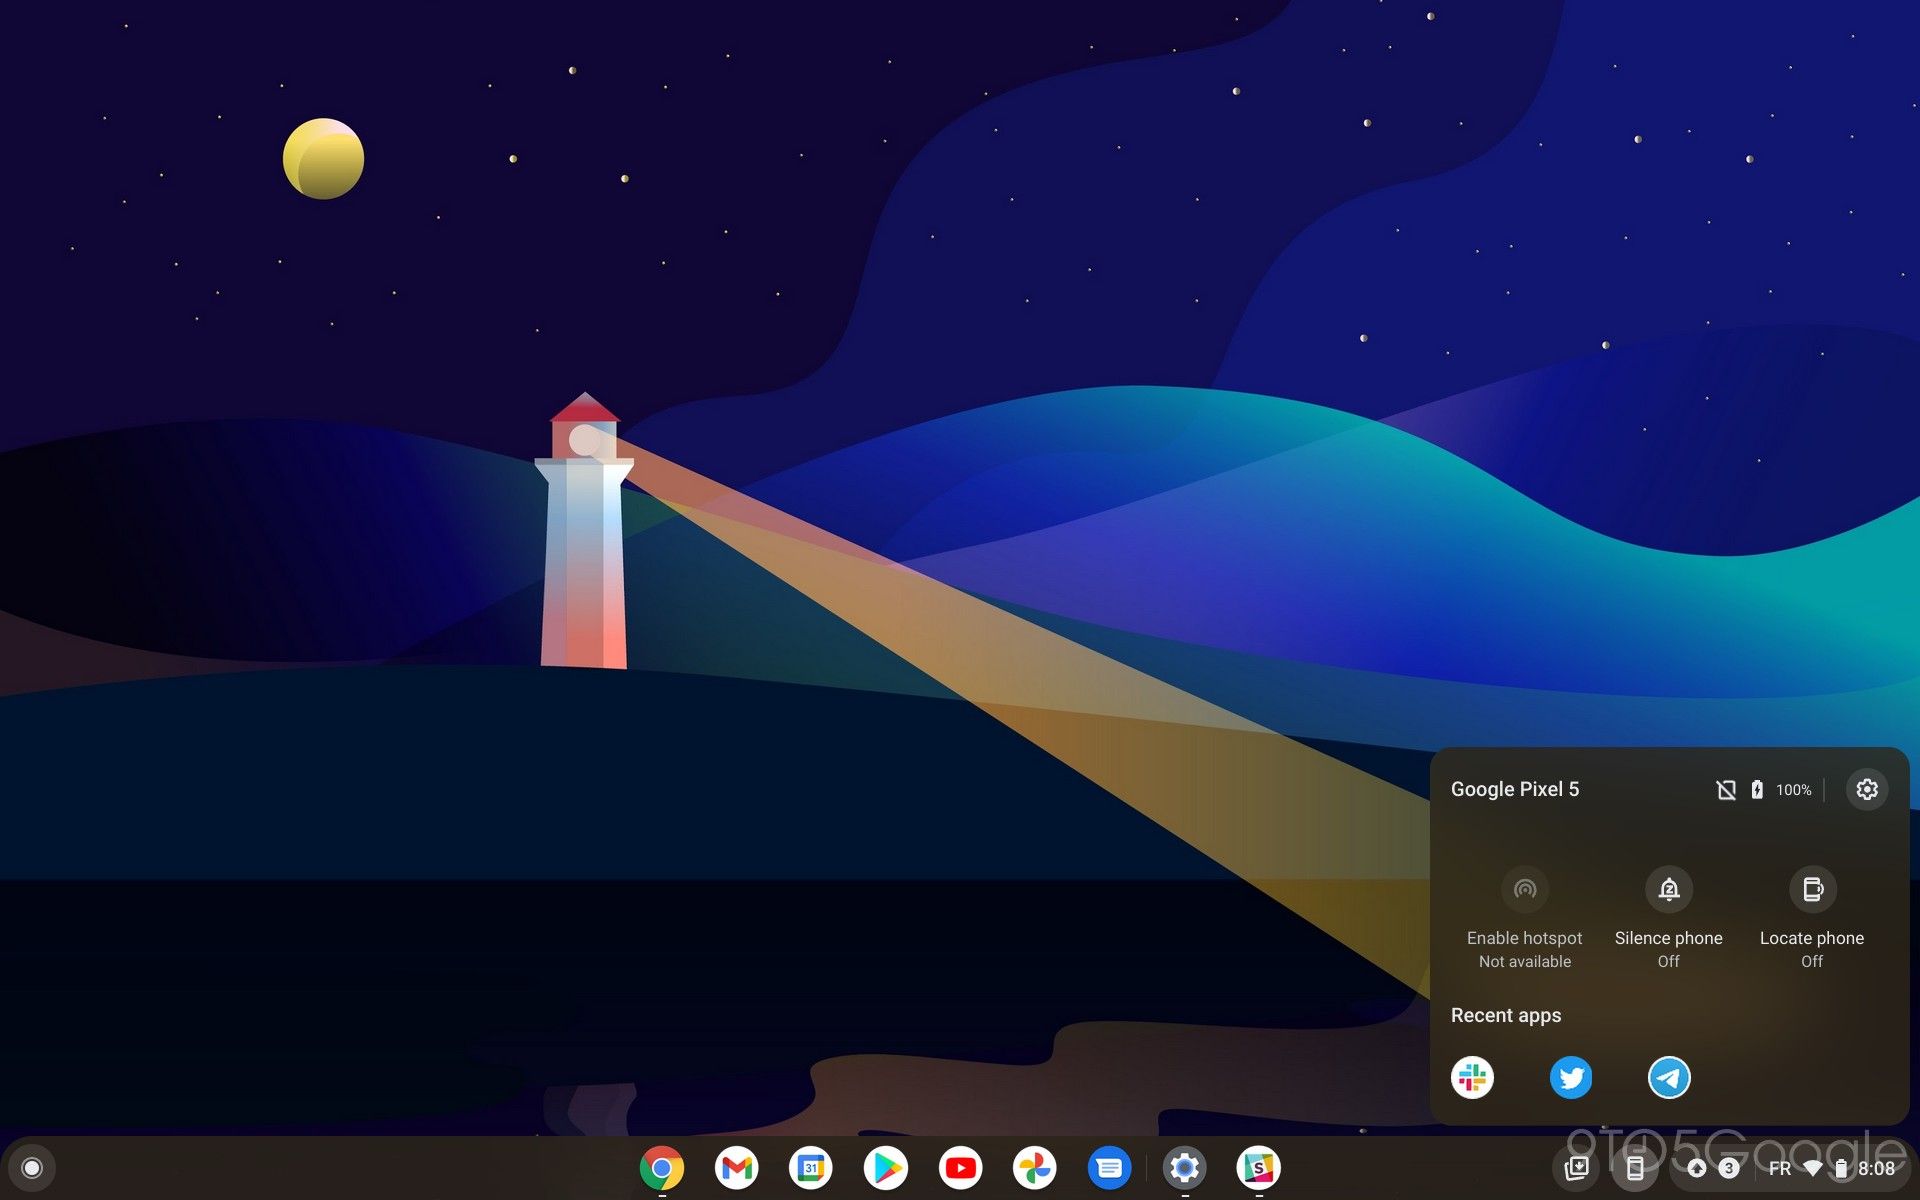 pixel-cross-device-streaming-chrome-os-recent-apps